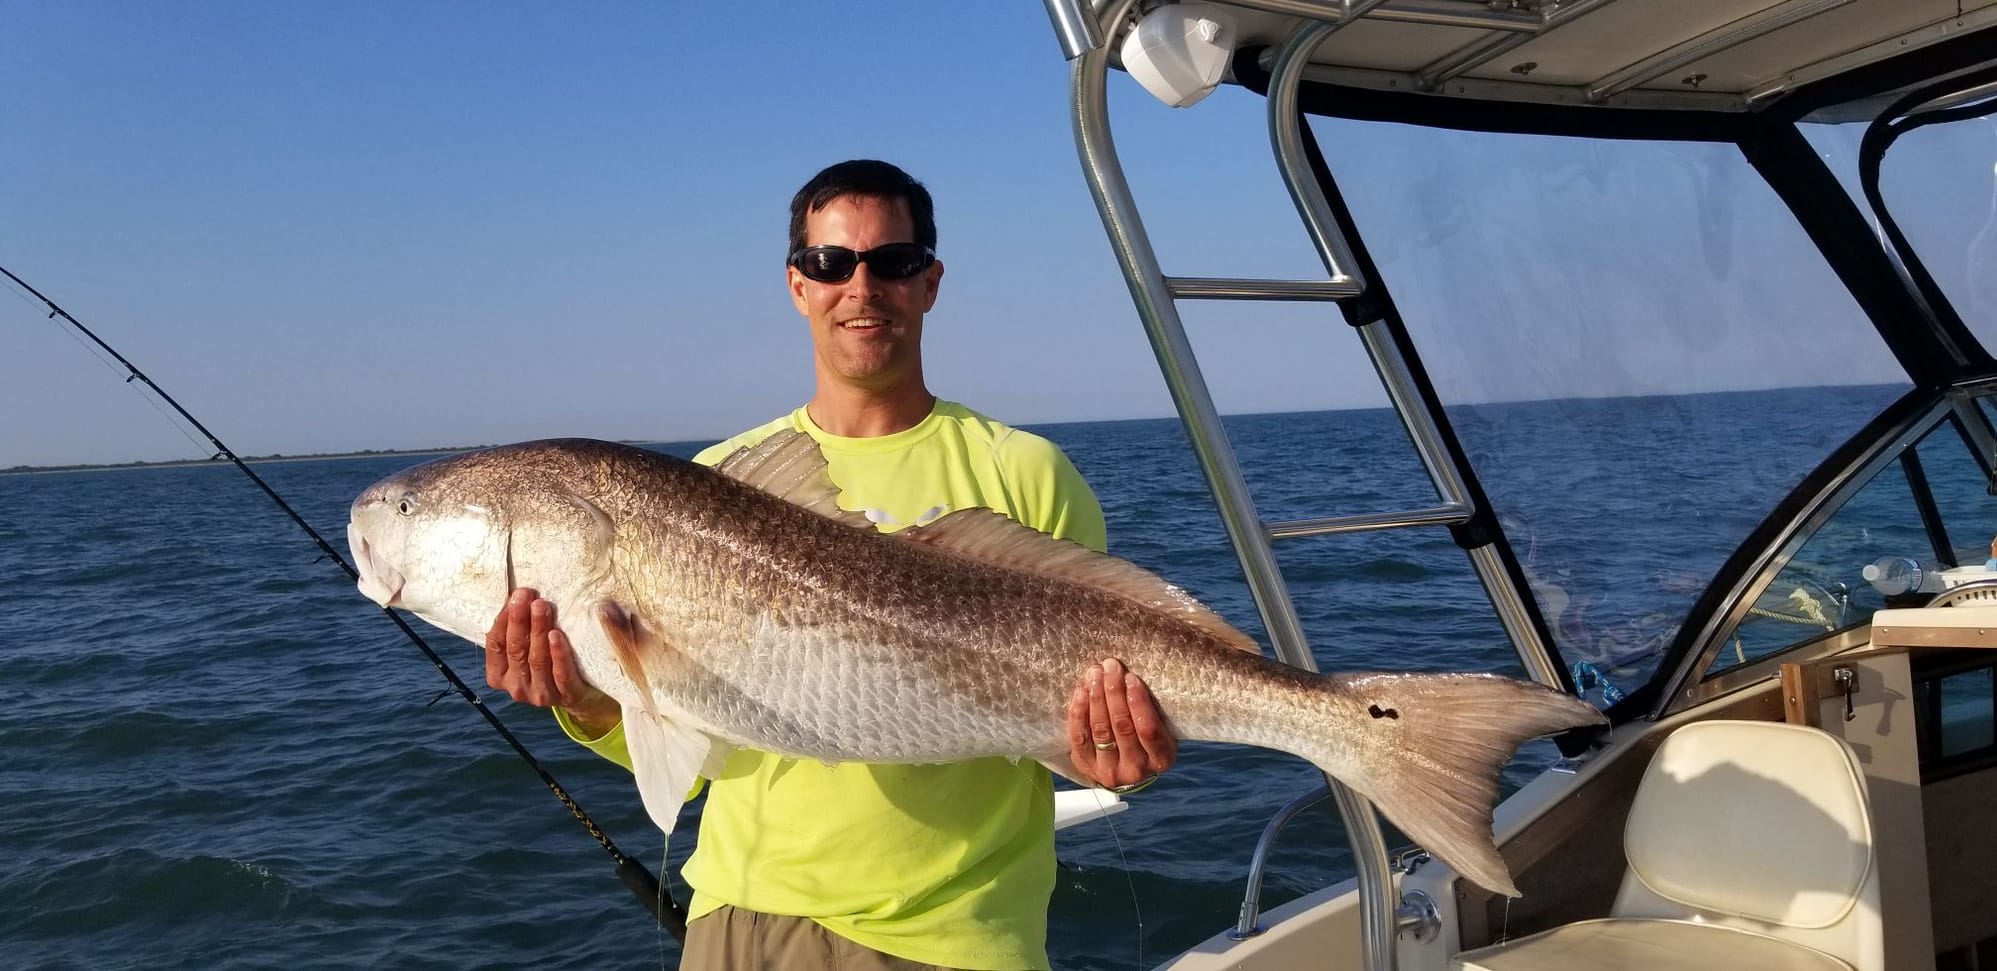 Fishing The Lower Bay 2018 - Page 11 - The Hull Truth - Boating and Fishing  Forum